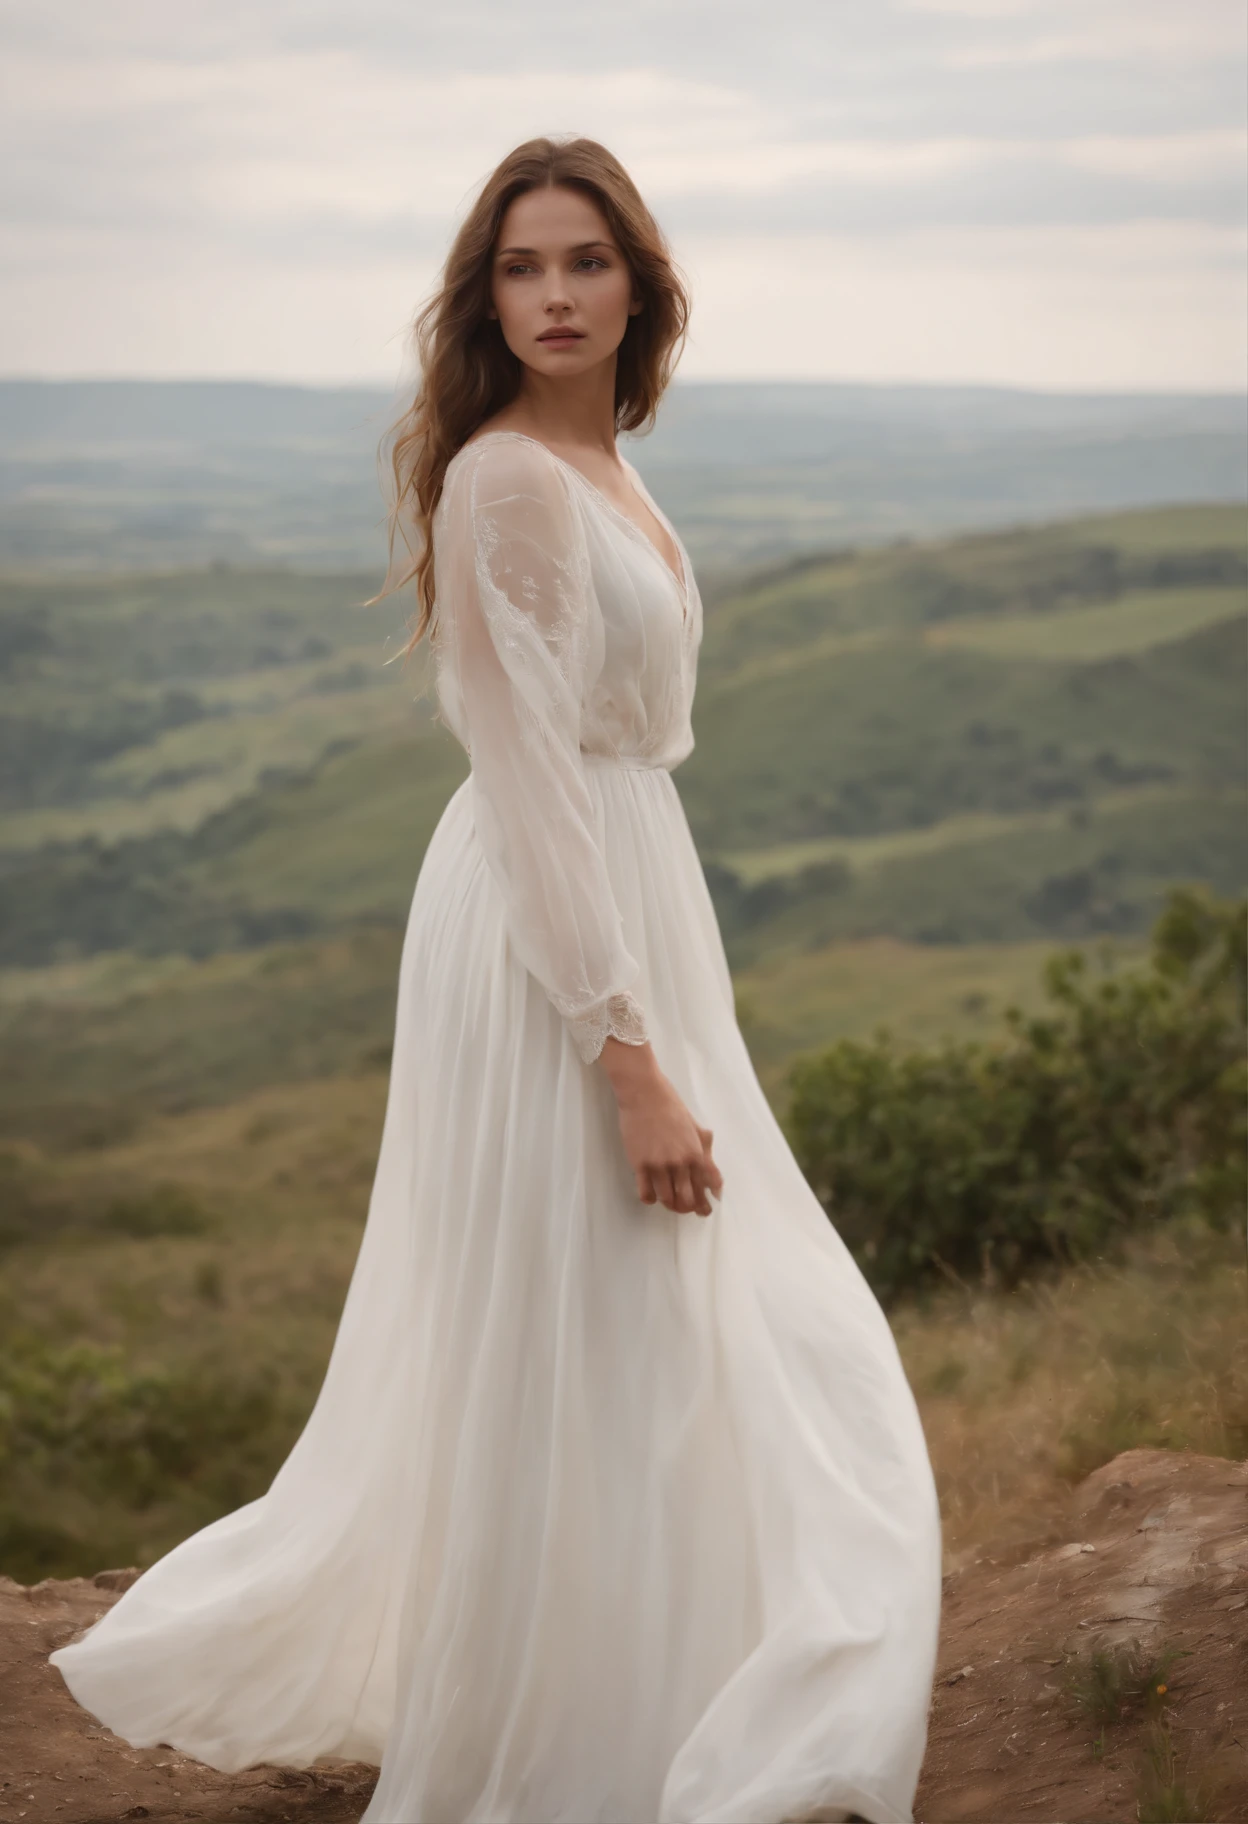 Beautiful Flowing White Dress Pictures, Photos, and Images for Facebook,  Tumblr, Pinterest, and Twitter